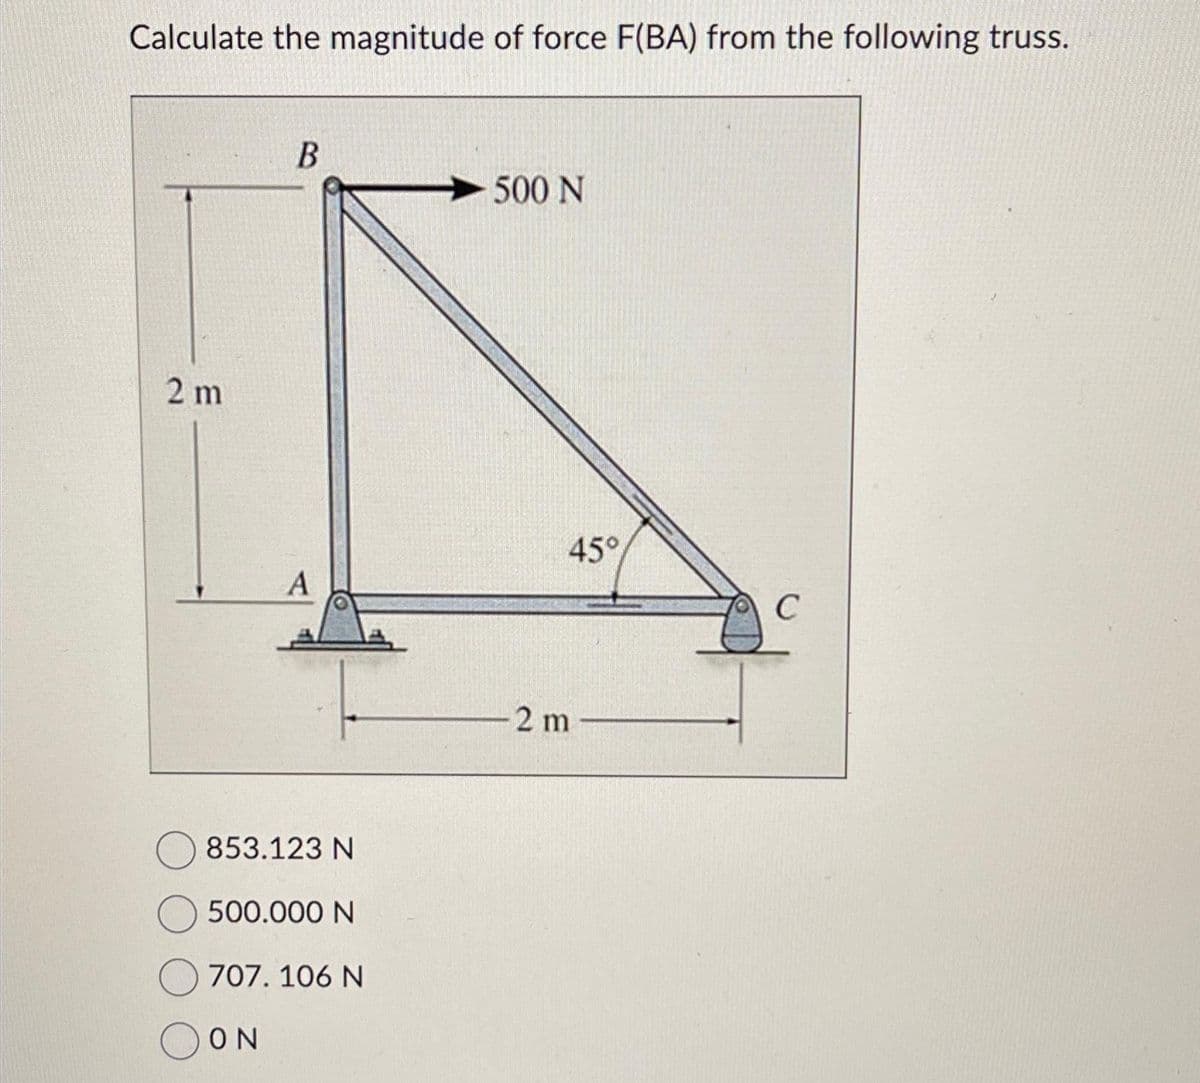 Calculate the magnitude of force F(BA) from the following truss.
2 m
B
A
853.123 N
500.000 N
ΟΝ
707. 106 N
500 N
45°
2m
C